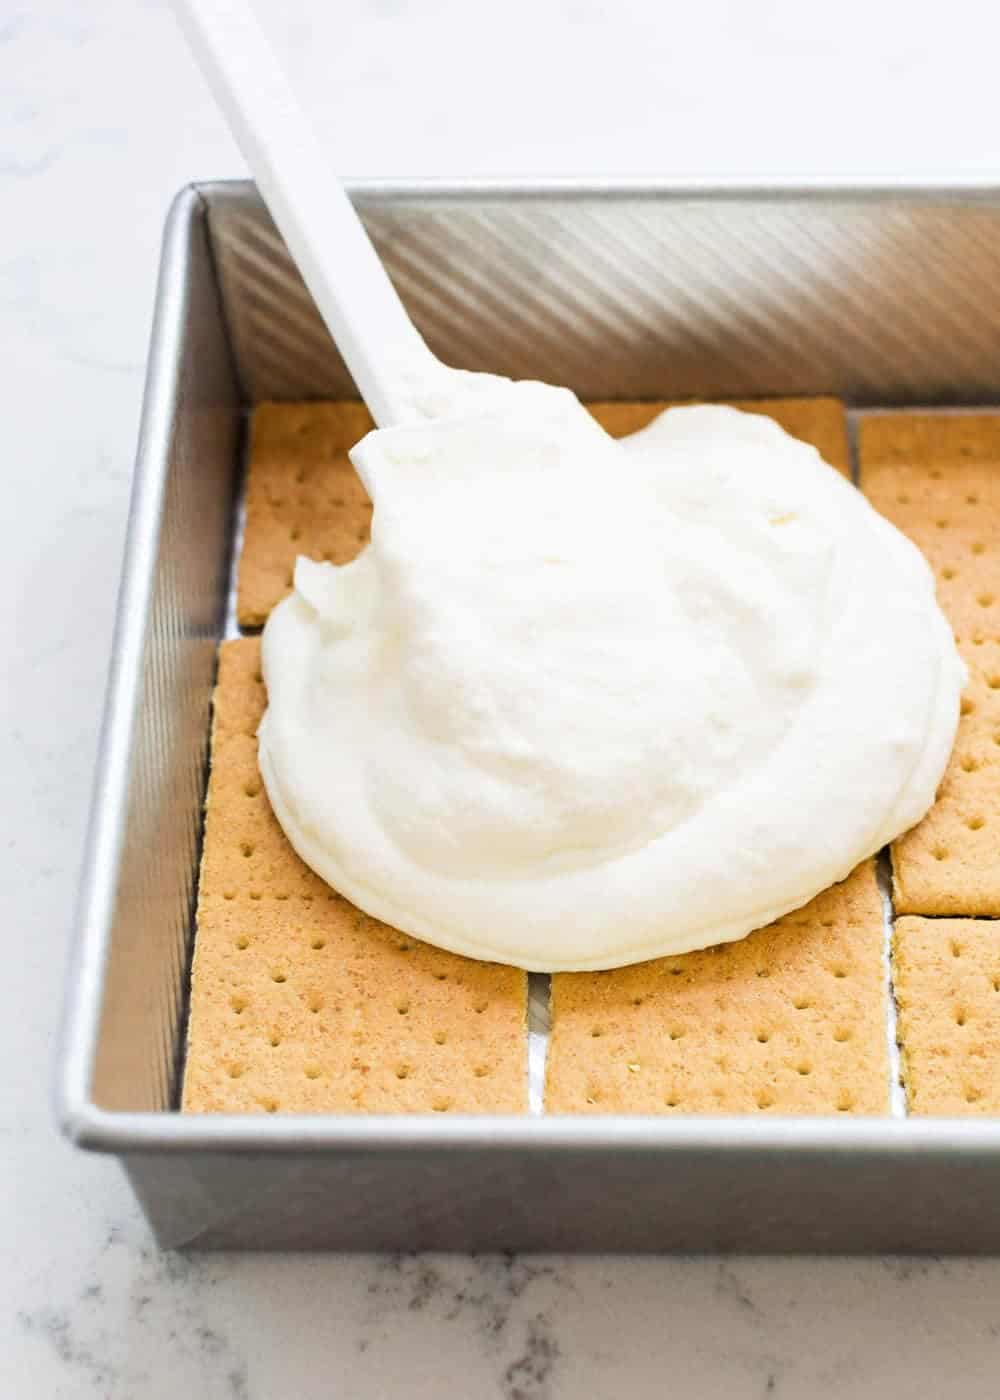 Spreading whipped cream over graham crackers in pan.